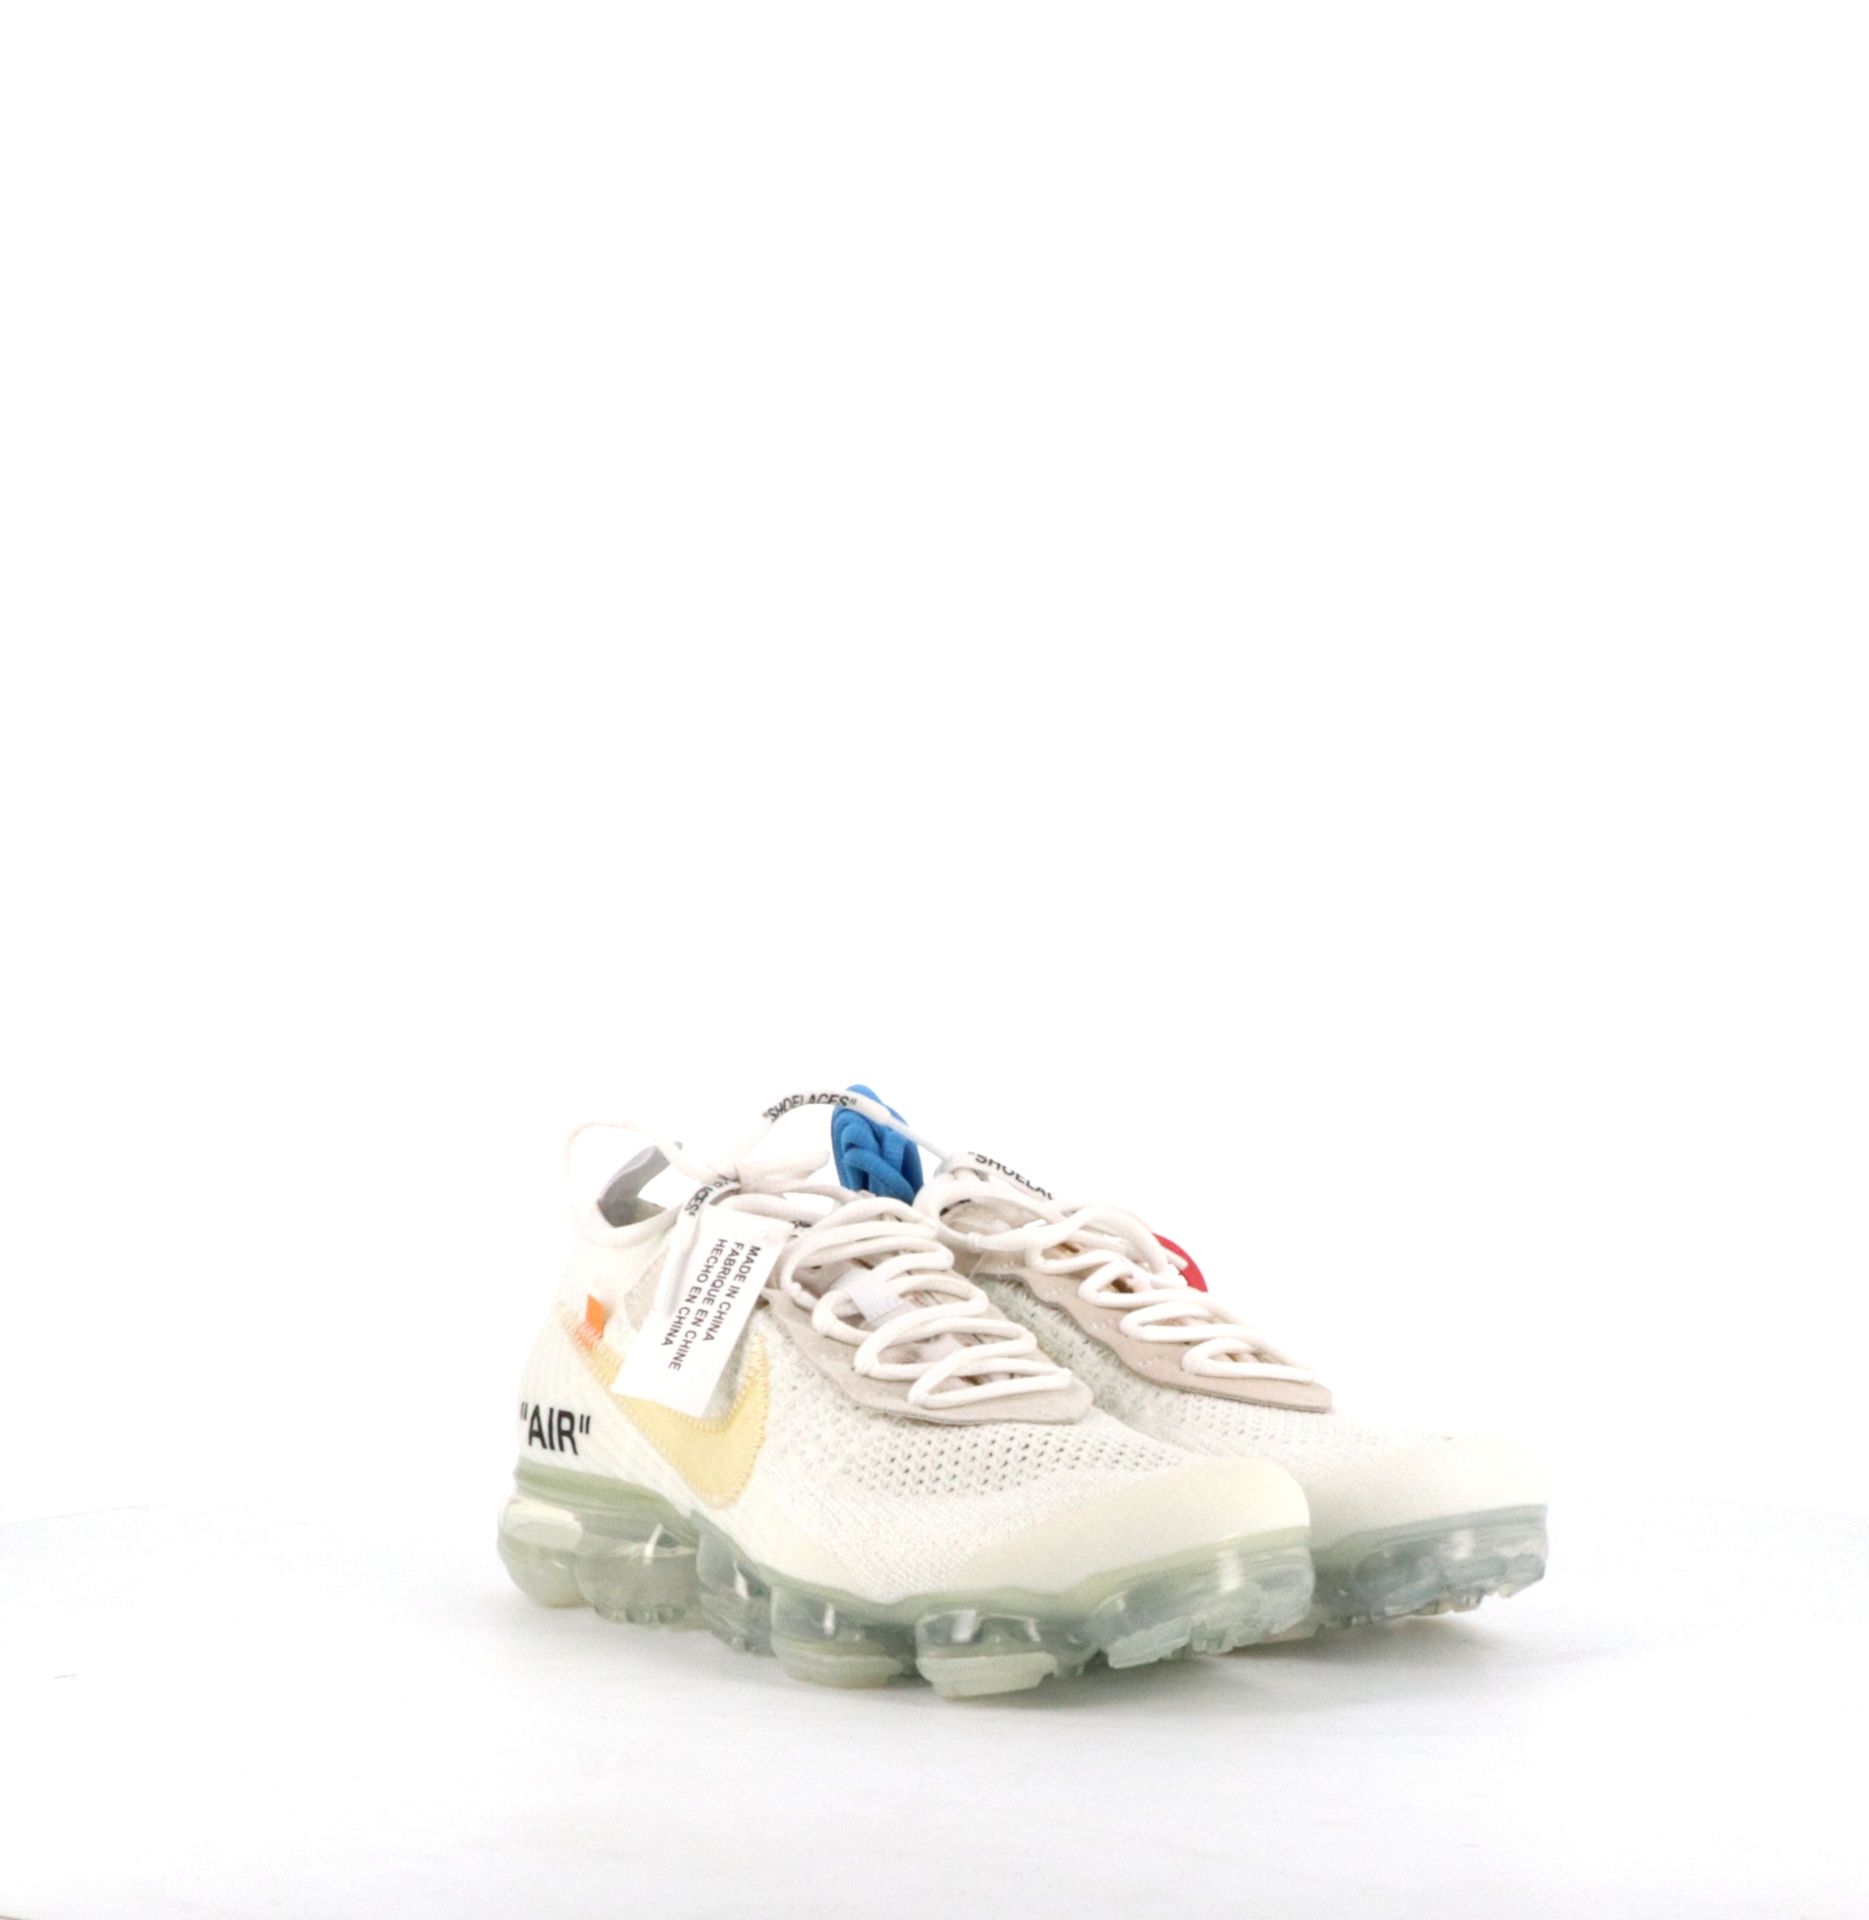 NIKE x OFF WHITE - 2018 NIKE OFF WHITE THE 10 ; AIR VAPORMAX FK

C: Blanco

S: T&hellip;